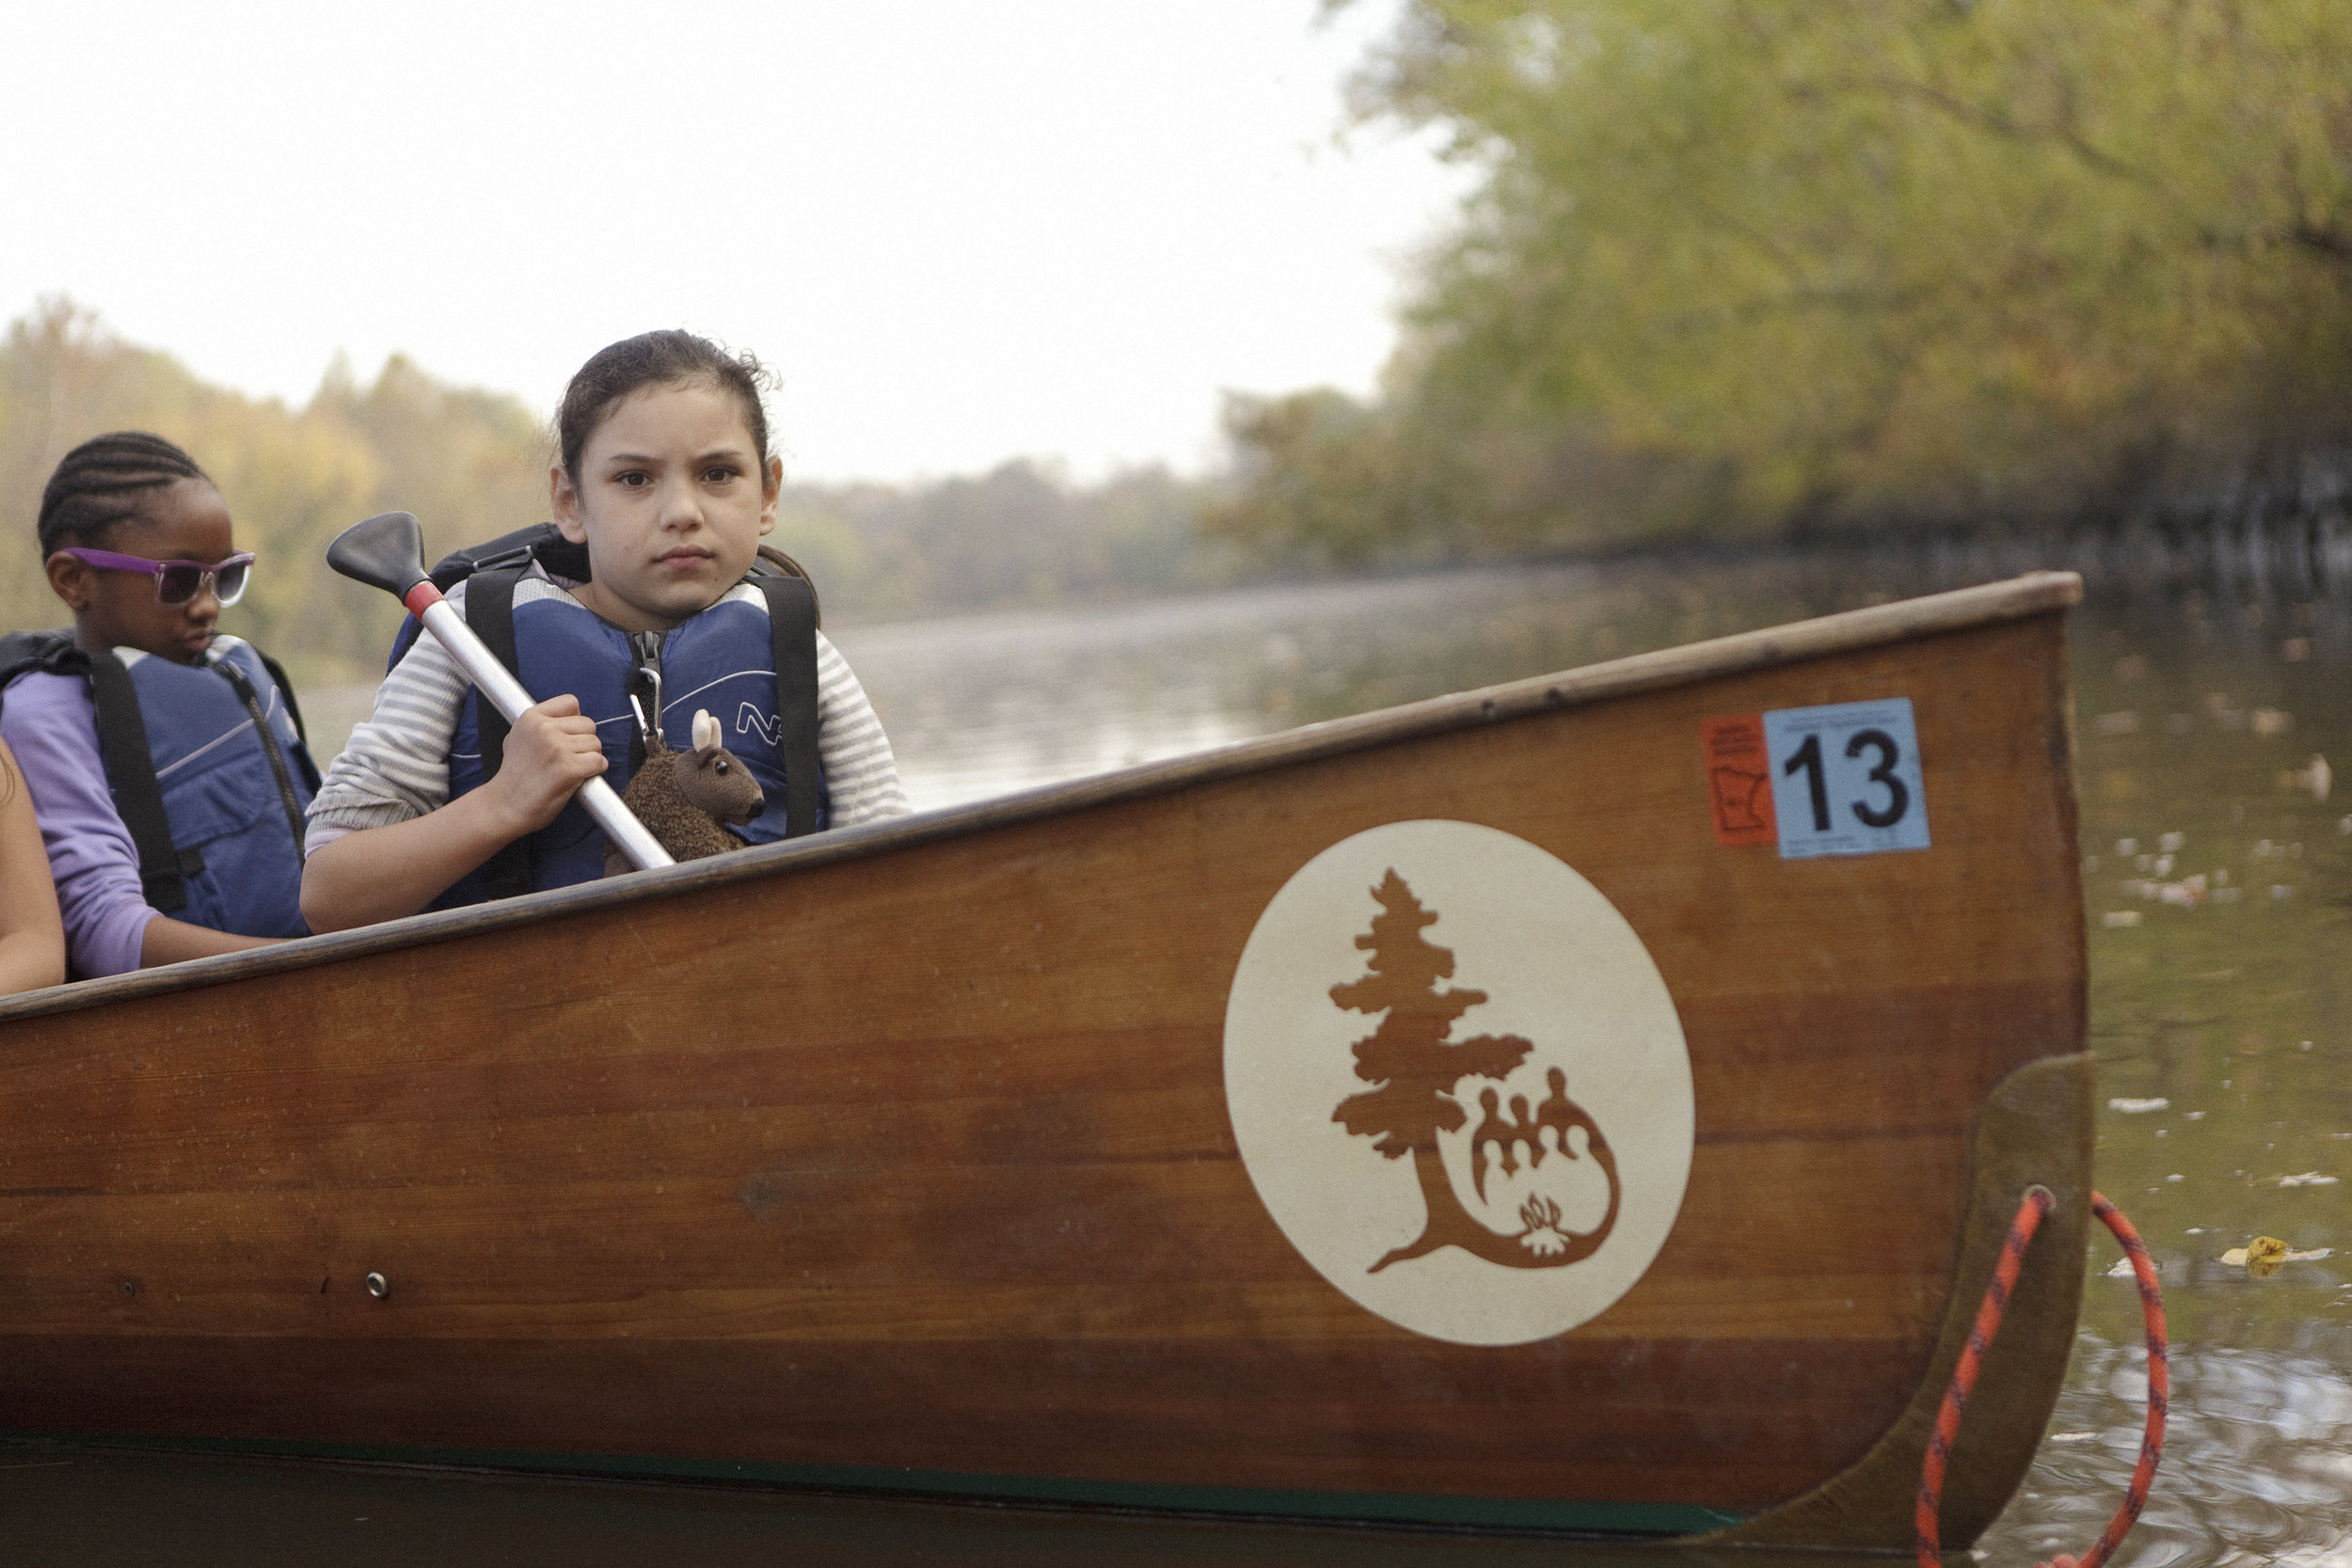  Wilderness Inquiry, a program that takes urban youth into nature, went canoeing with elementary school children just outside of Kenwilworth Aquatic Gardens in October of 2012. 